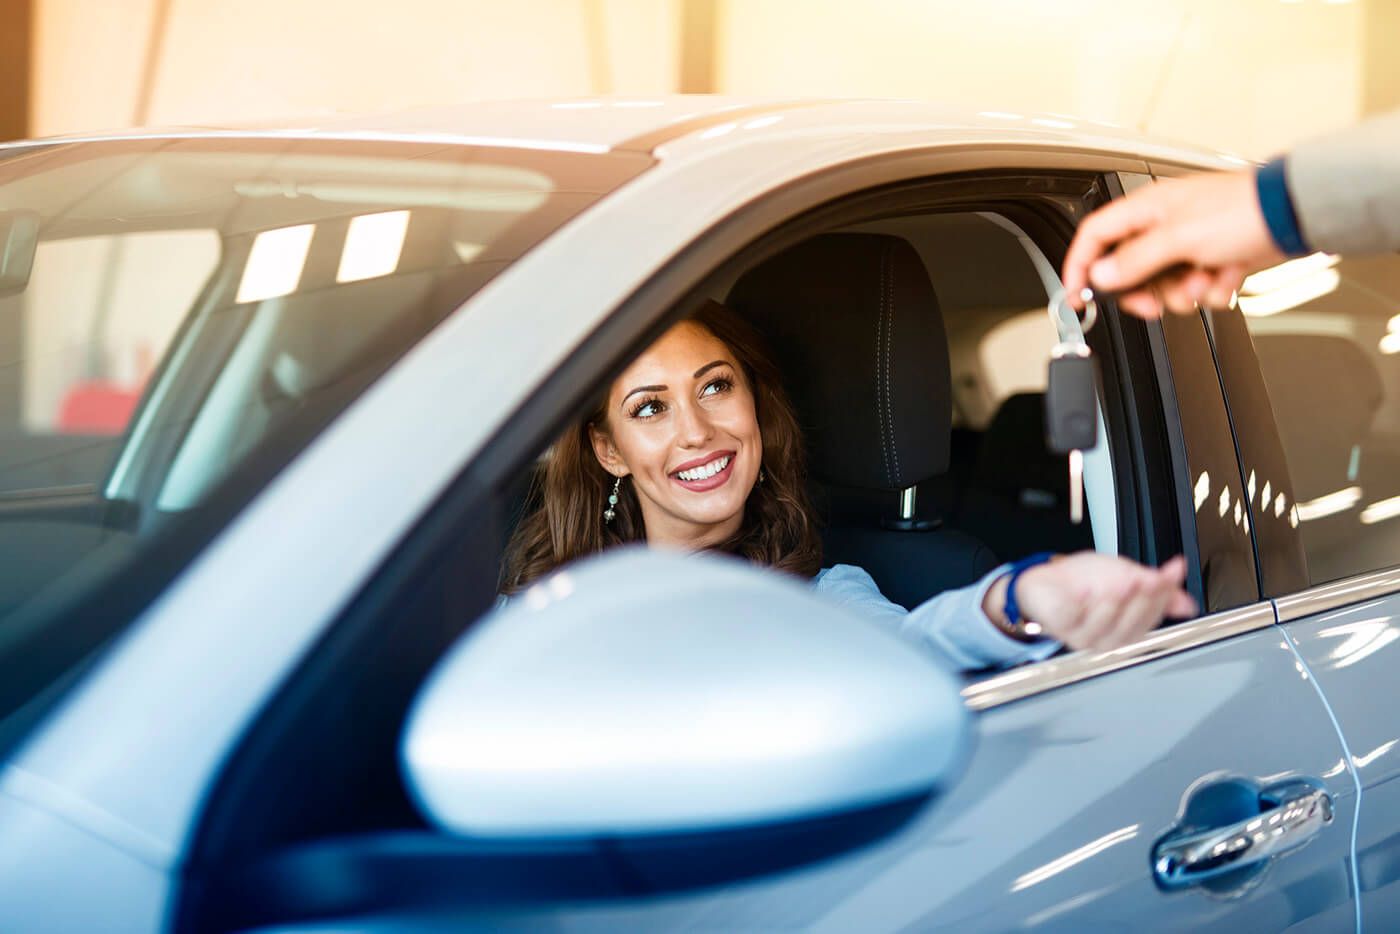 Bank or Dealership: What's the Best Way to Finance a Car? - Experian